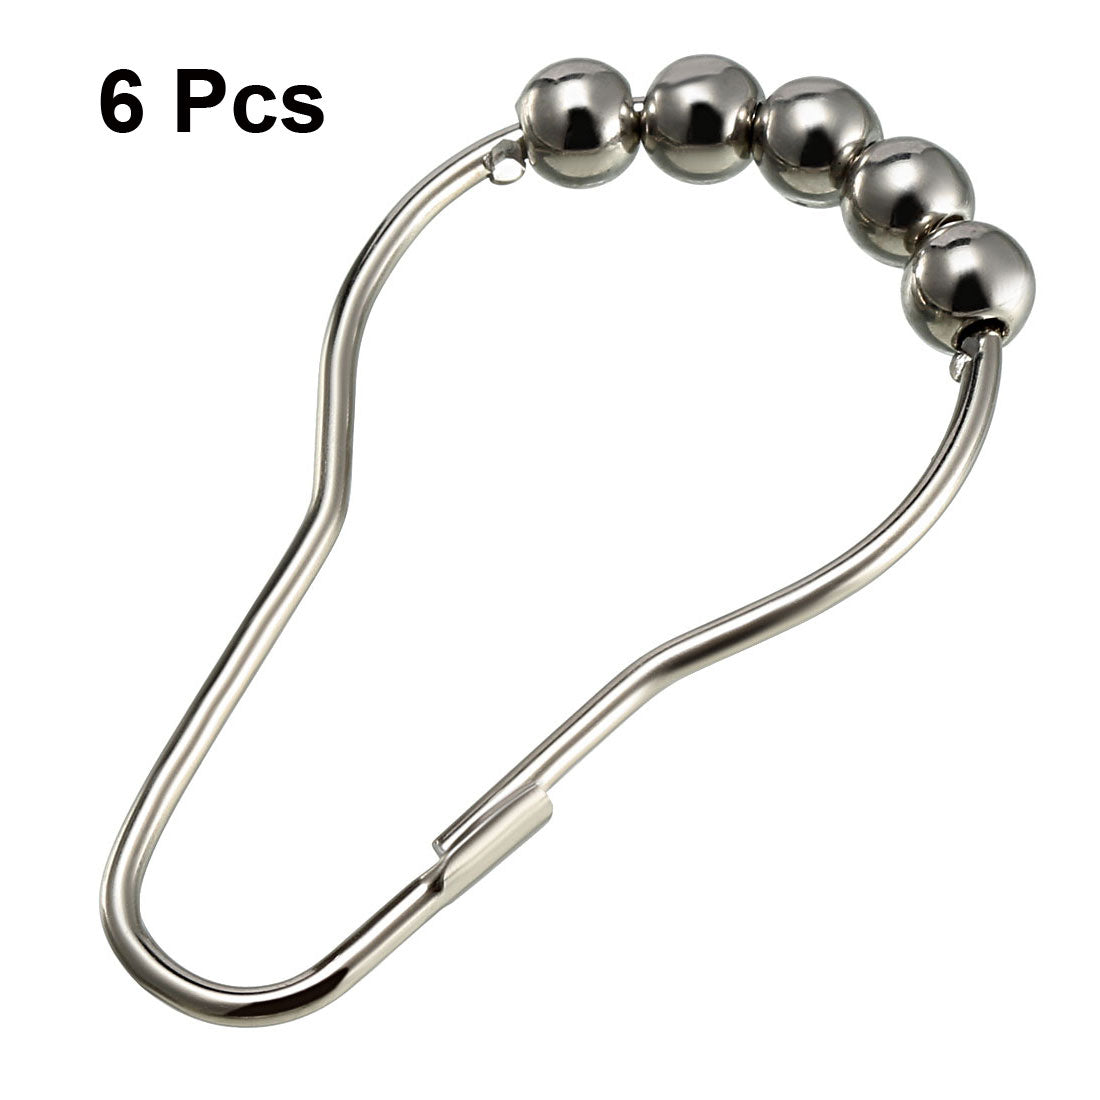 uxcell Uxcell Shower Curtain Ring Hooks Metal for Bathroom Shower Rods Curtains Liners Iron Ball 6 Pcs